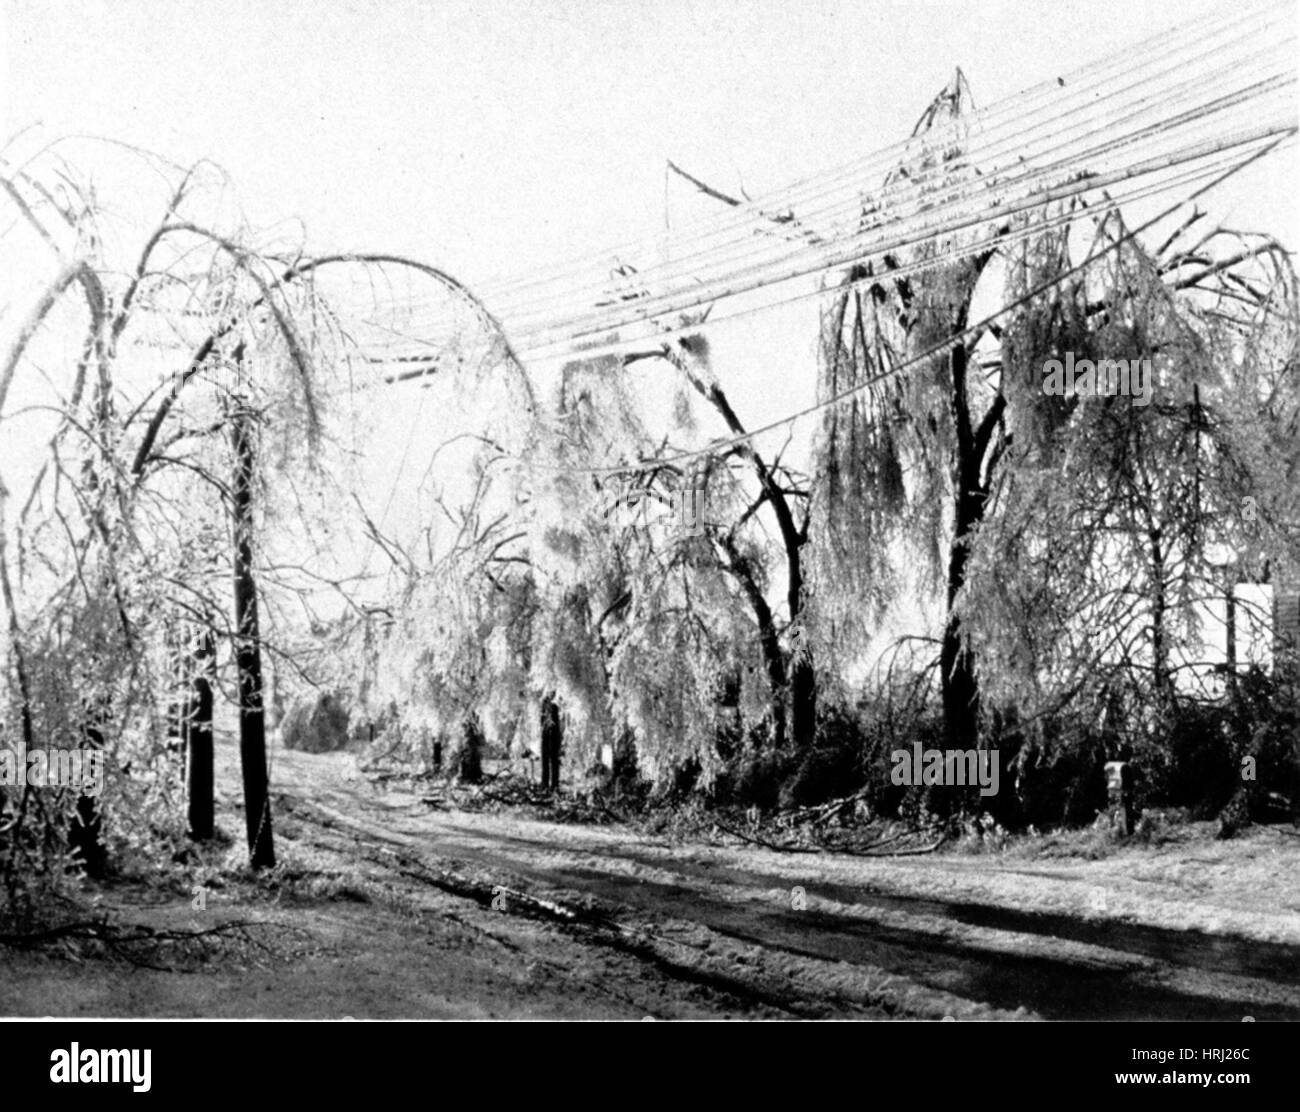 Heavy Hand of Winter on Trees and Wires, 1931 Stock Photo